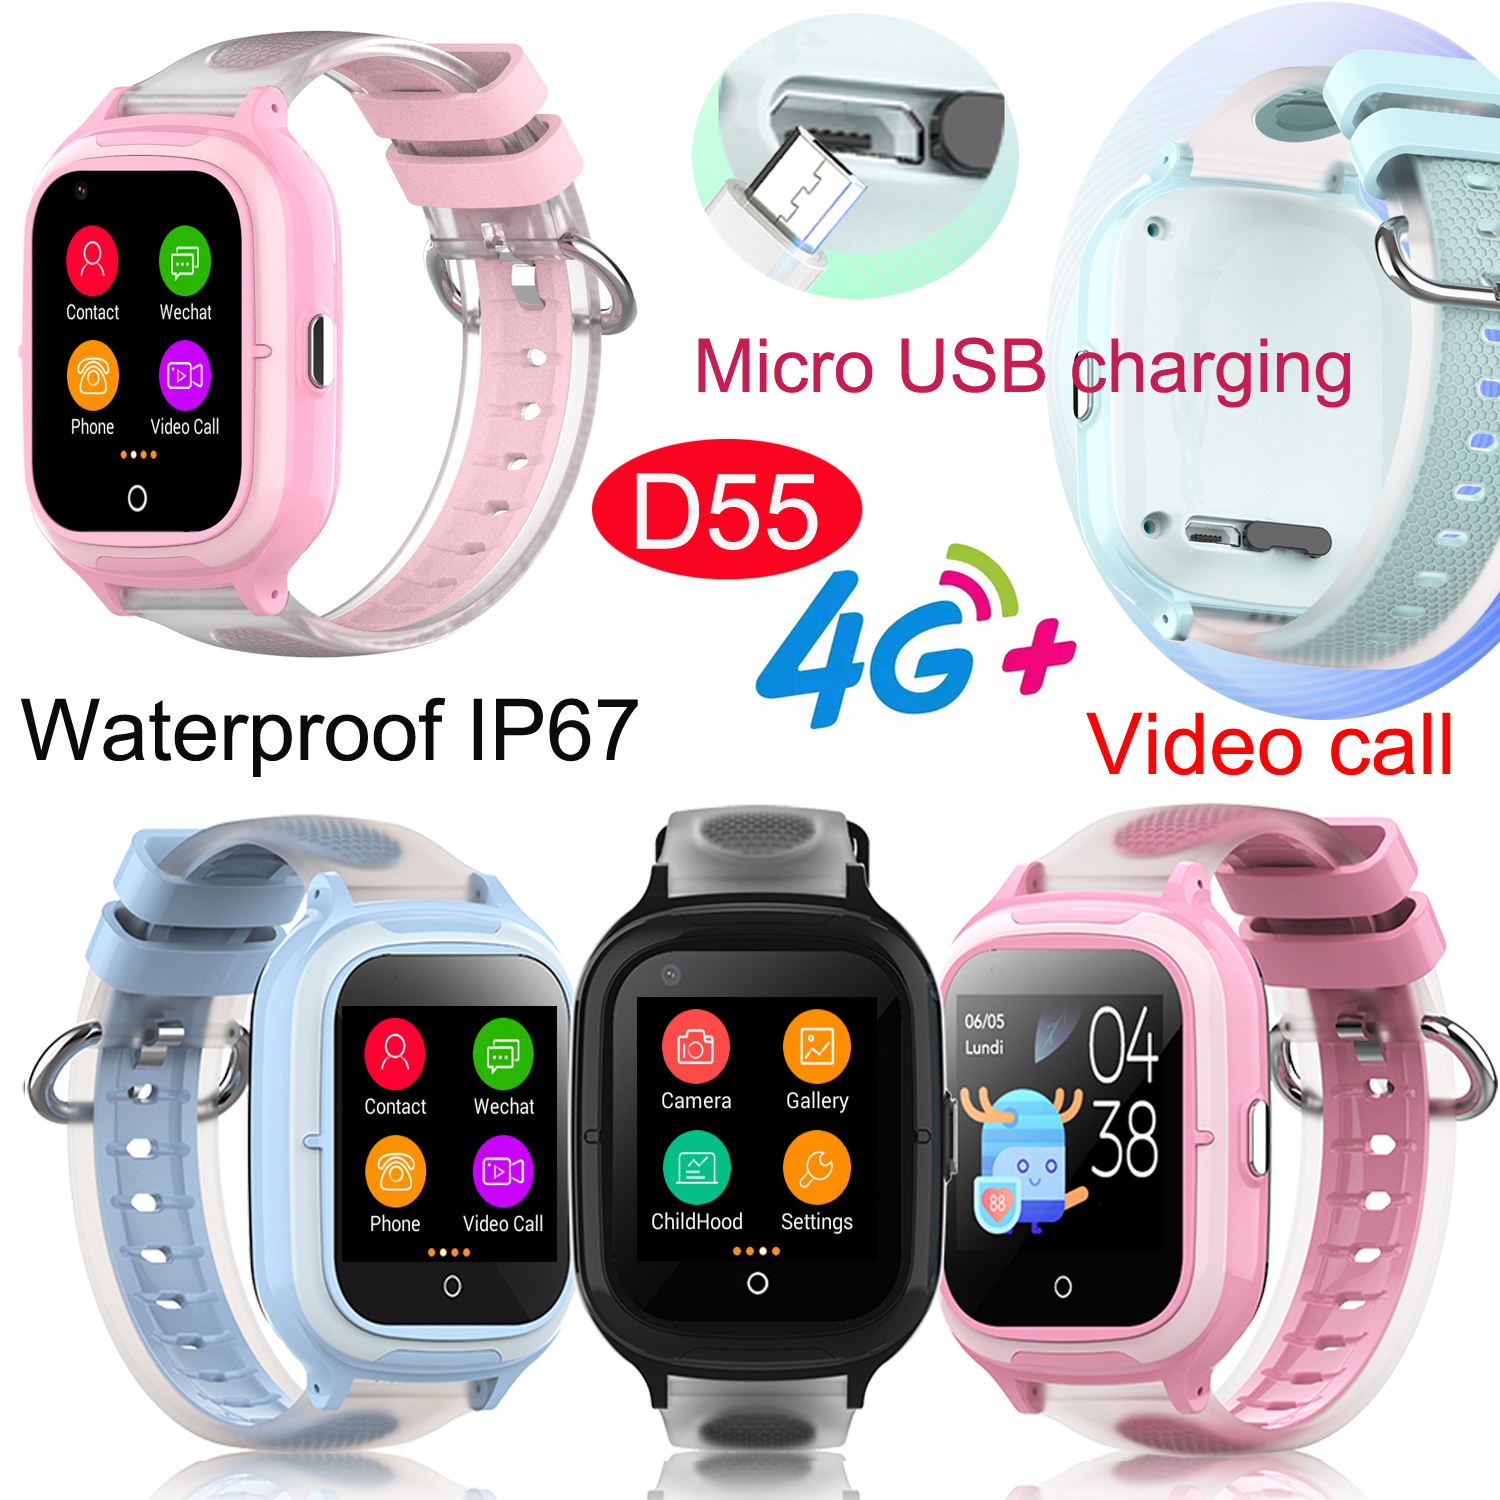 LTE IP67 Waterproof Girls GPS Tracker watch with Video call D55